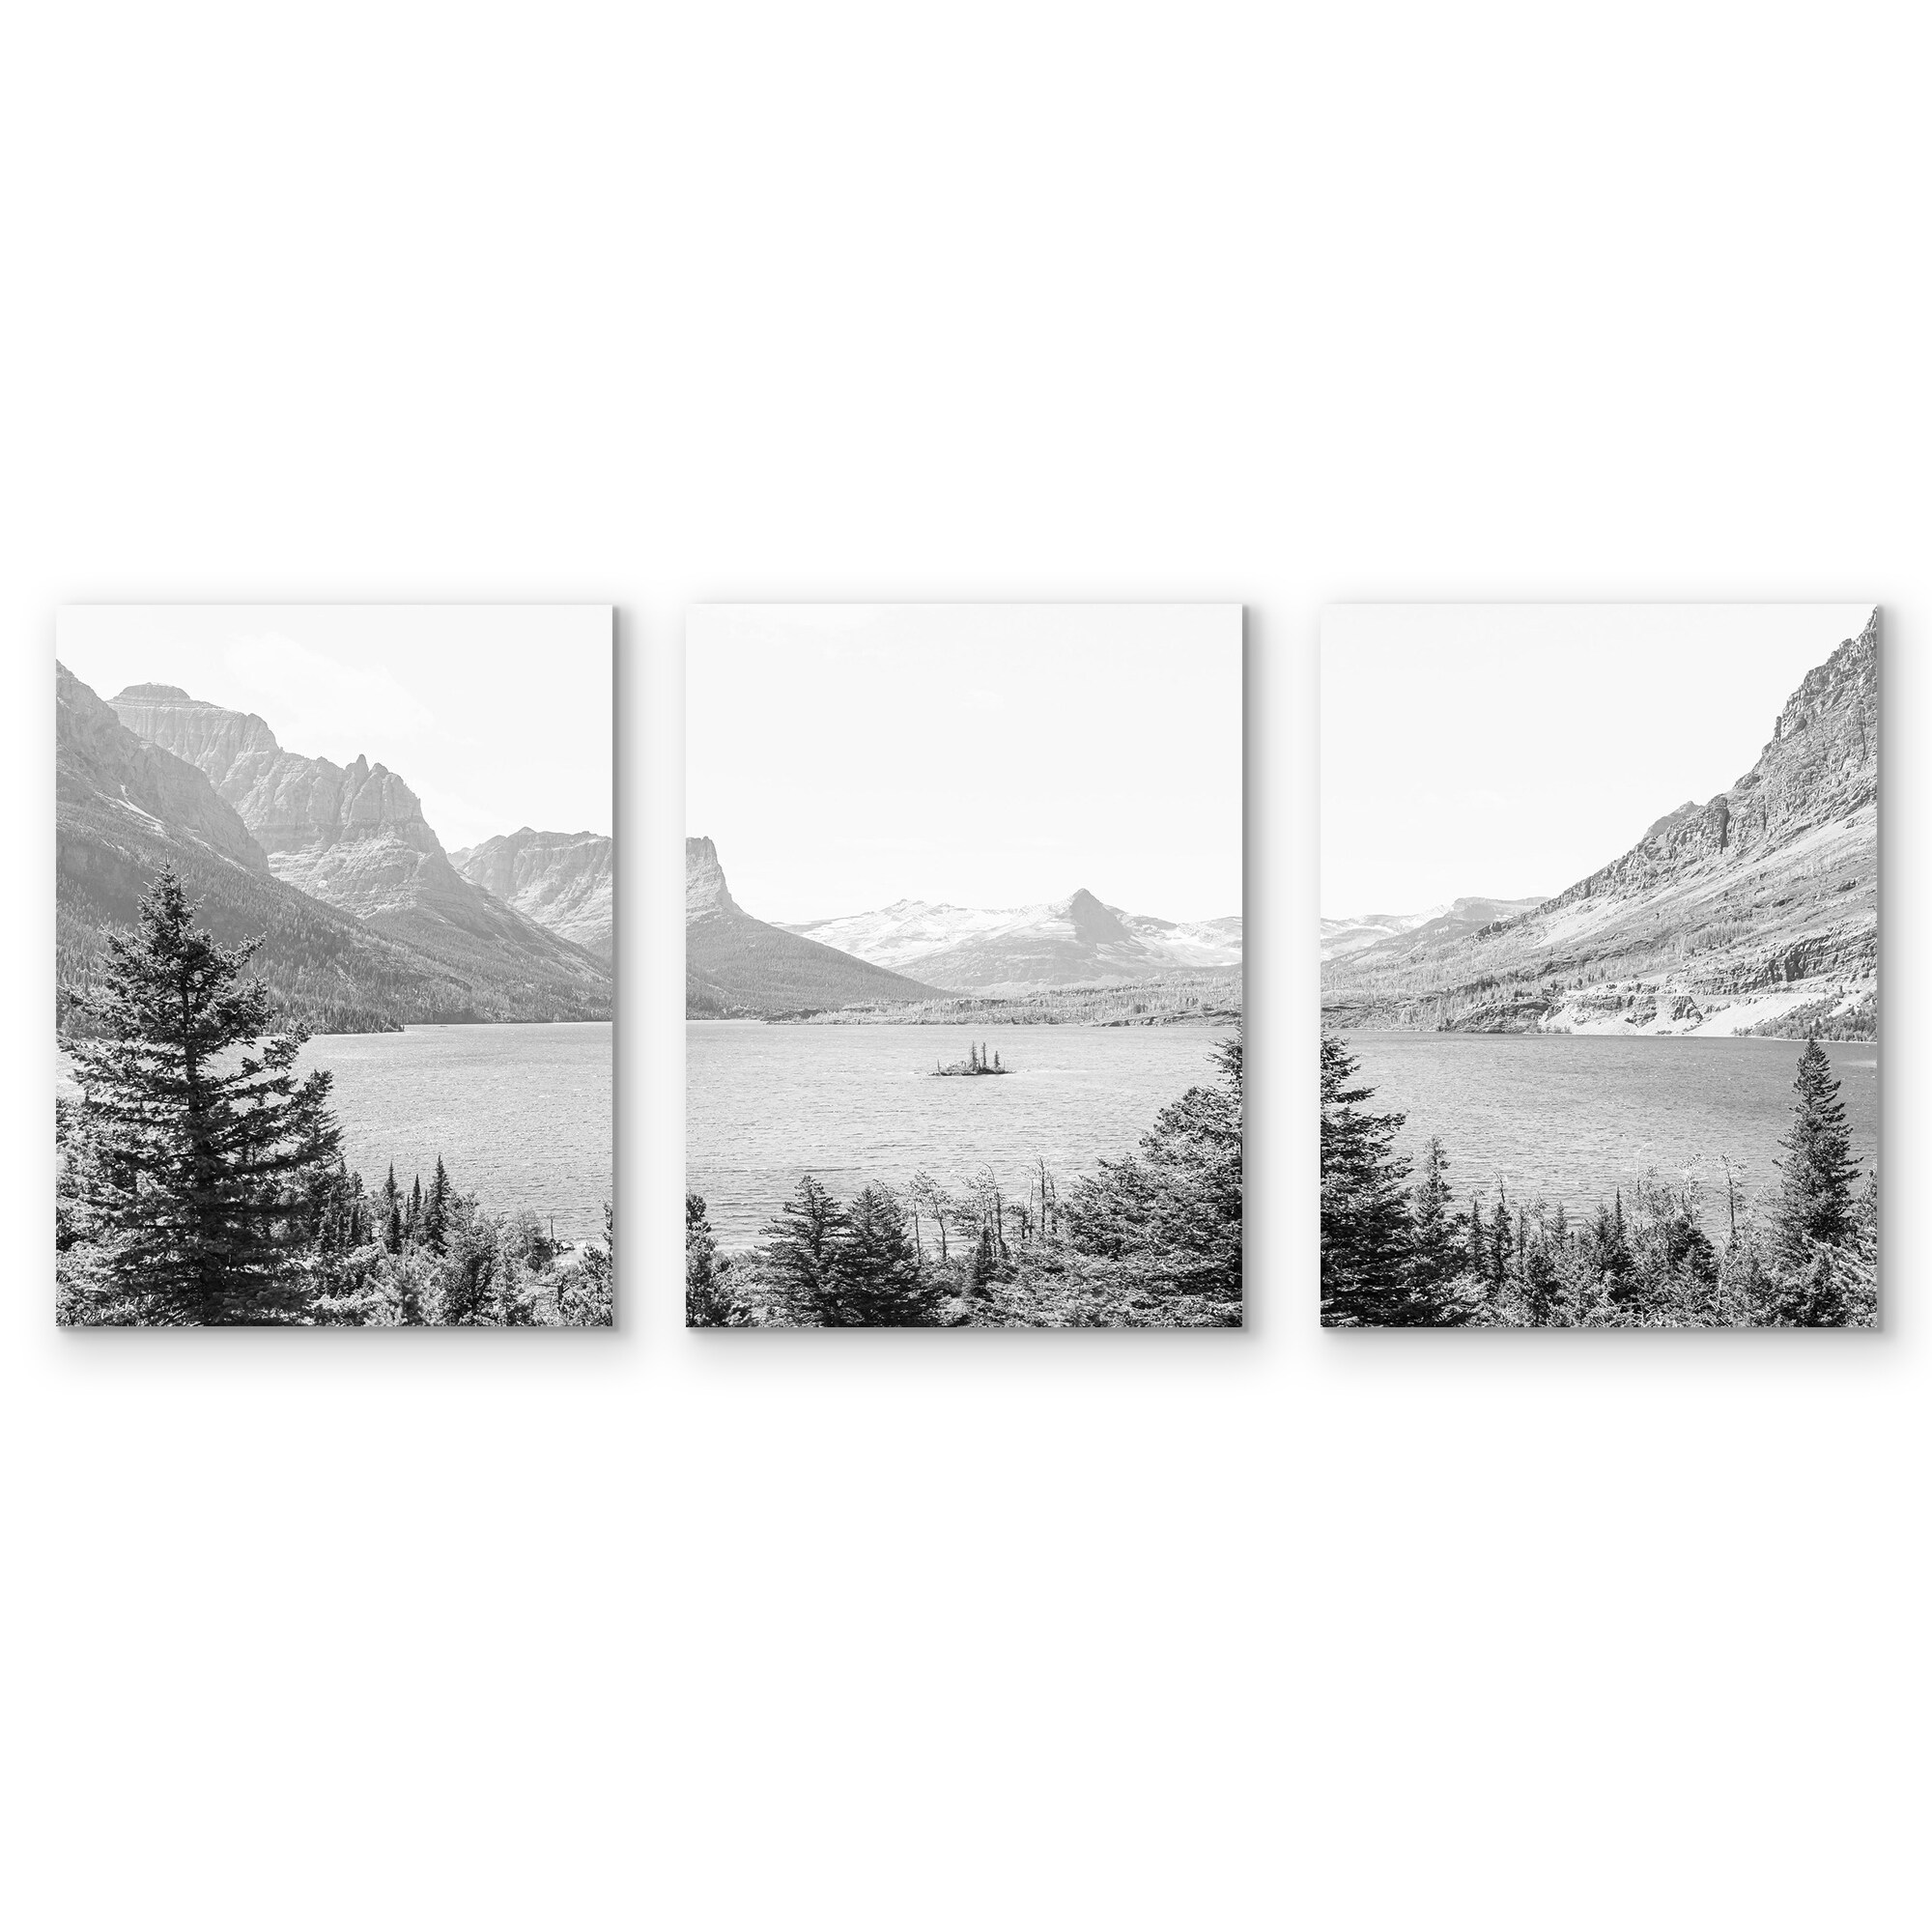 Americanflat 3 Piece 16x20 Wrapped Canvas Set - Black and Whiteby Artvir